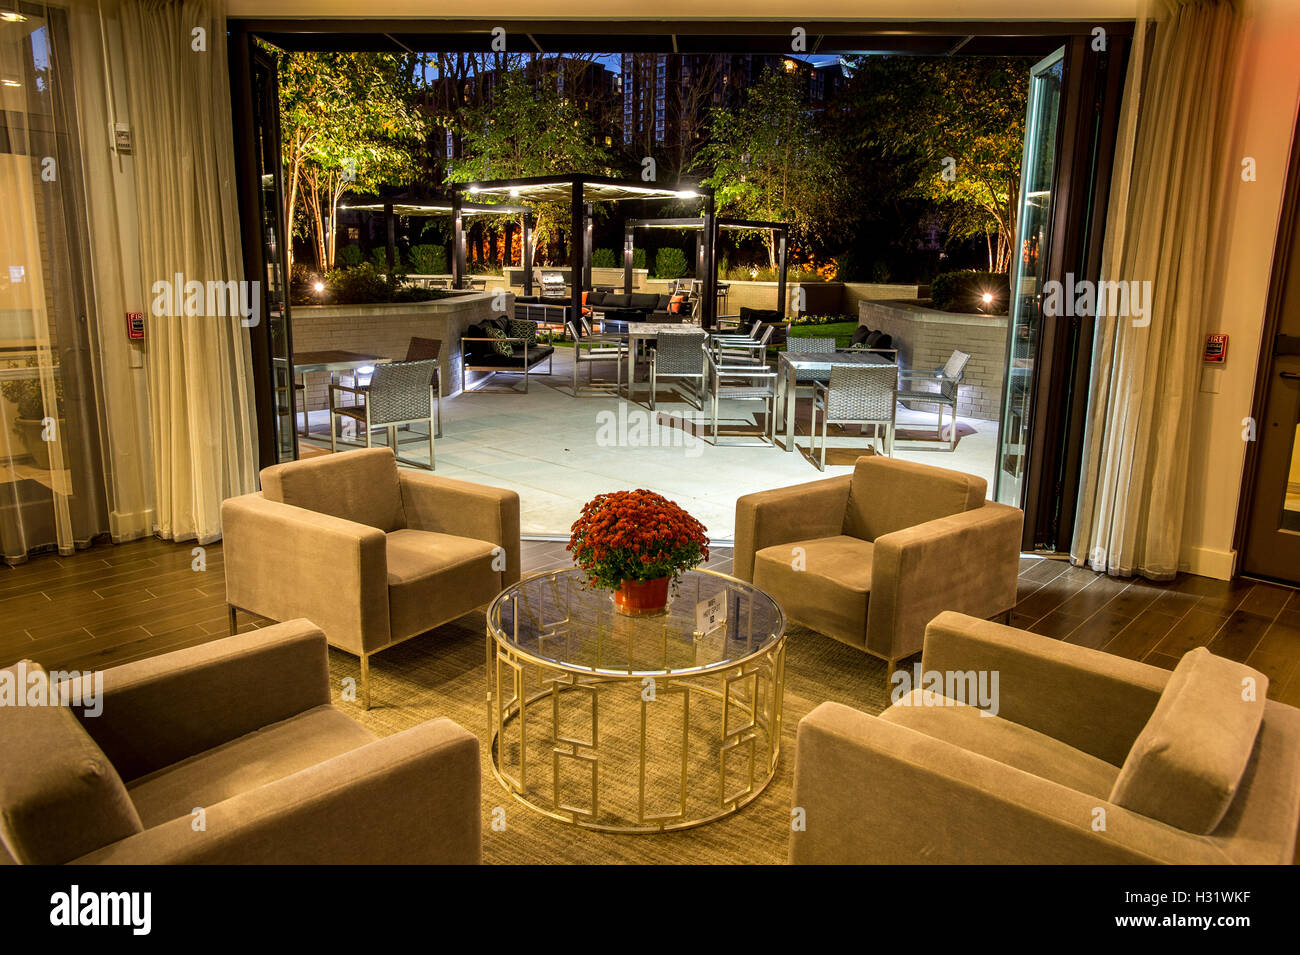 Seating area inside an apartment complex in Arlington, Virginia. Stock Photo